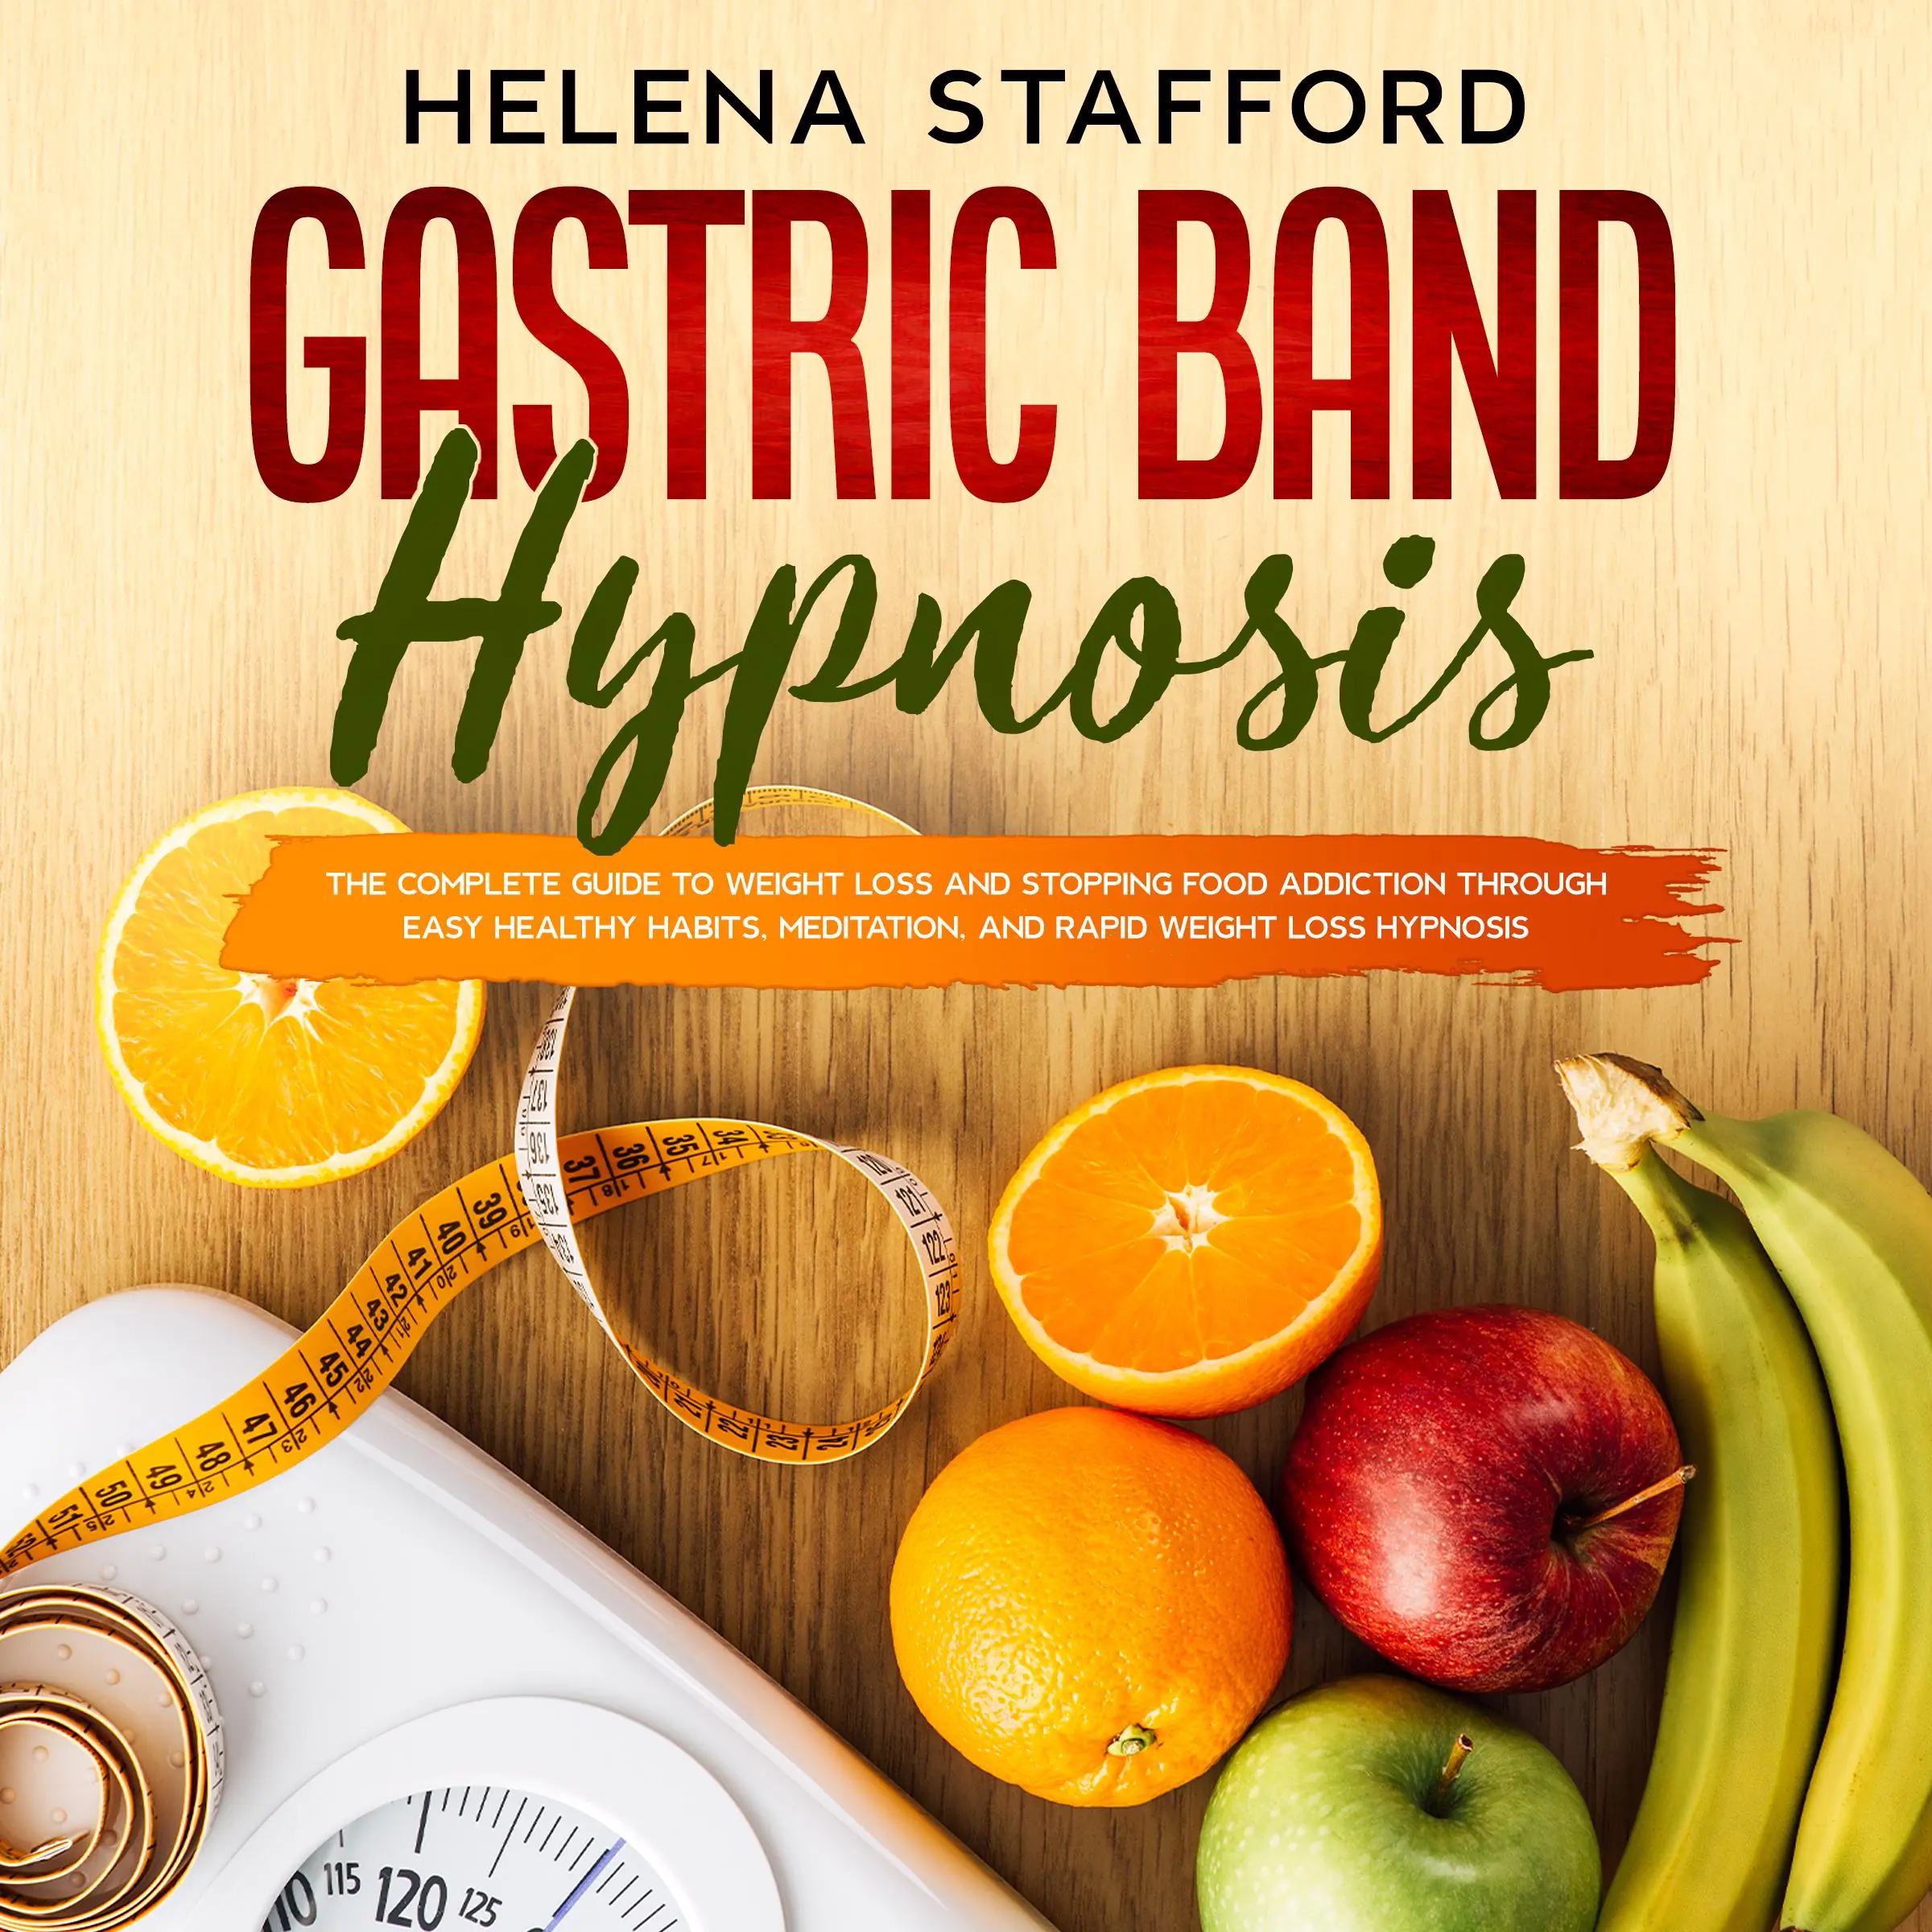 Gastric Band Hypnosis: The Complete Guide to Weight Loss and Stopping Food Addiction Through Easy Healthy Habits, Meditation, and Rapid Weight Loss Hypnosis Audiobook by Helena Stafford